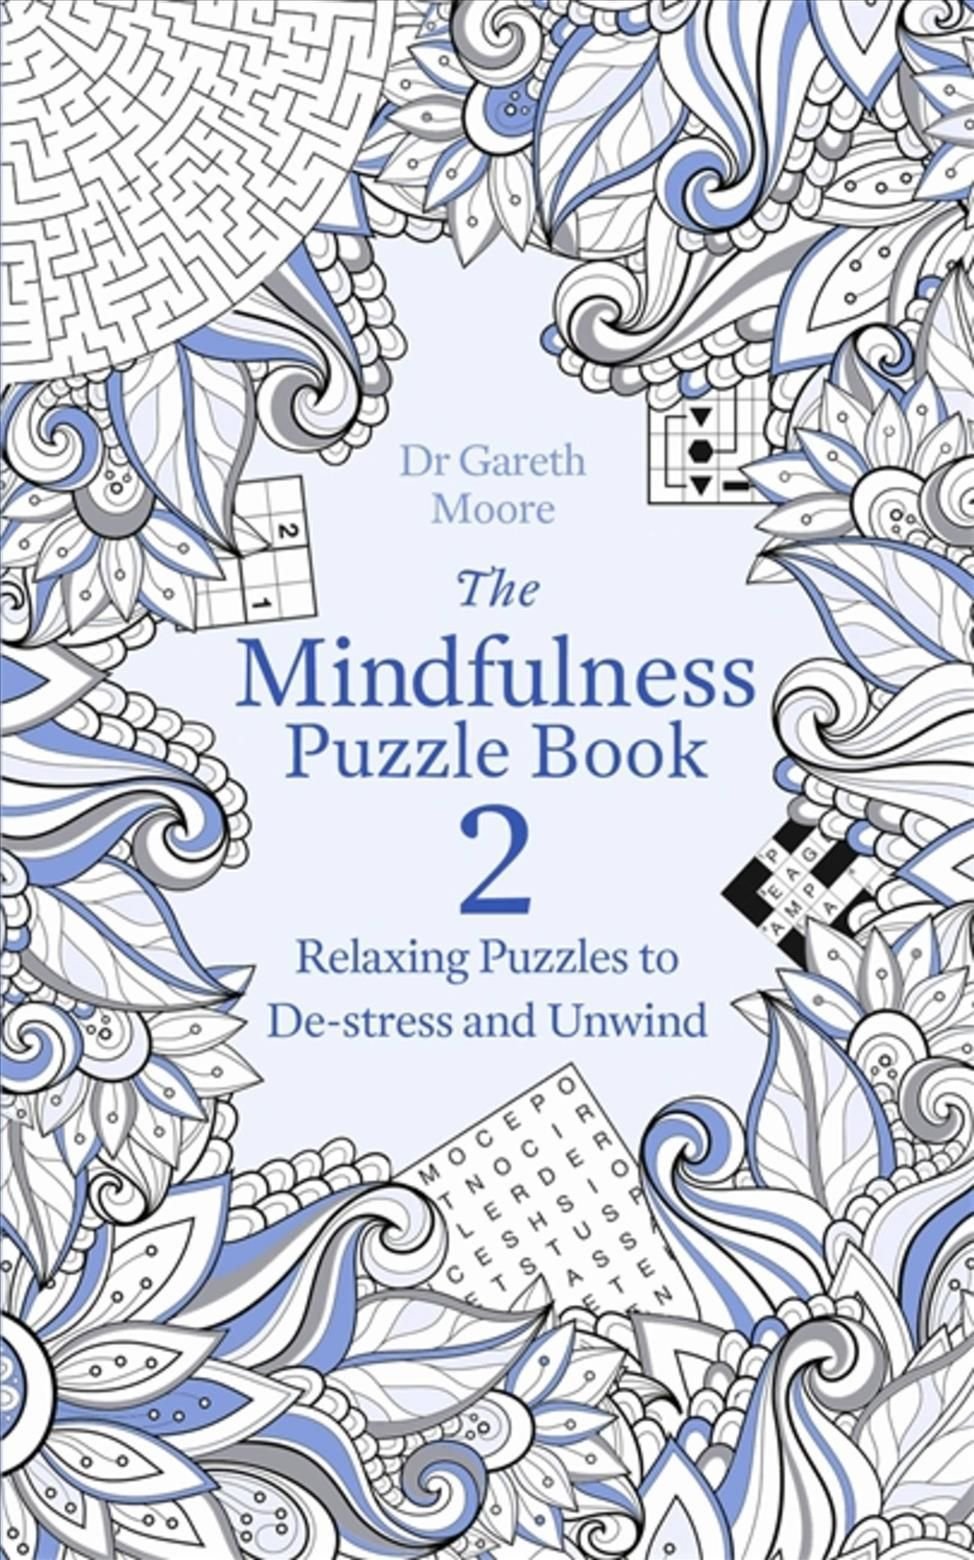 The Mindfulness Activity Book - by Gareth Moore (Paperback)